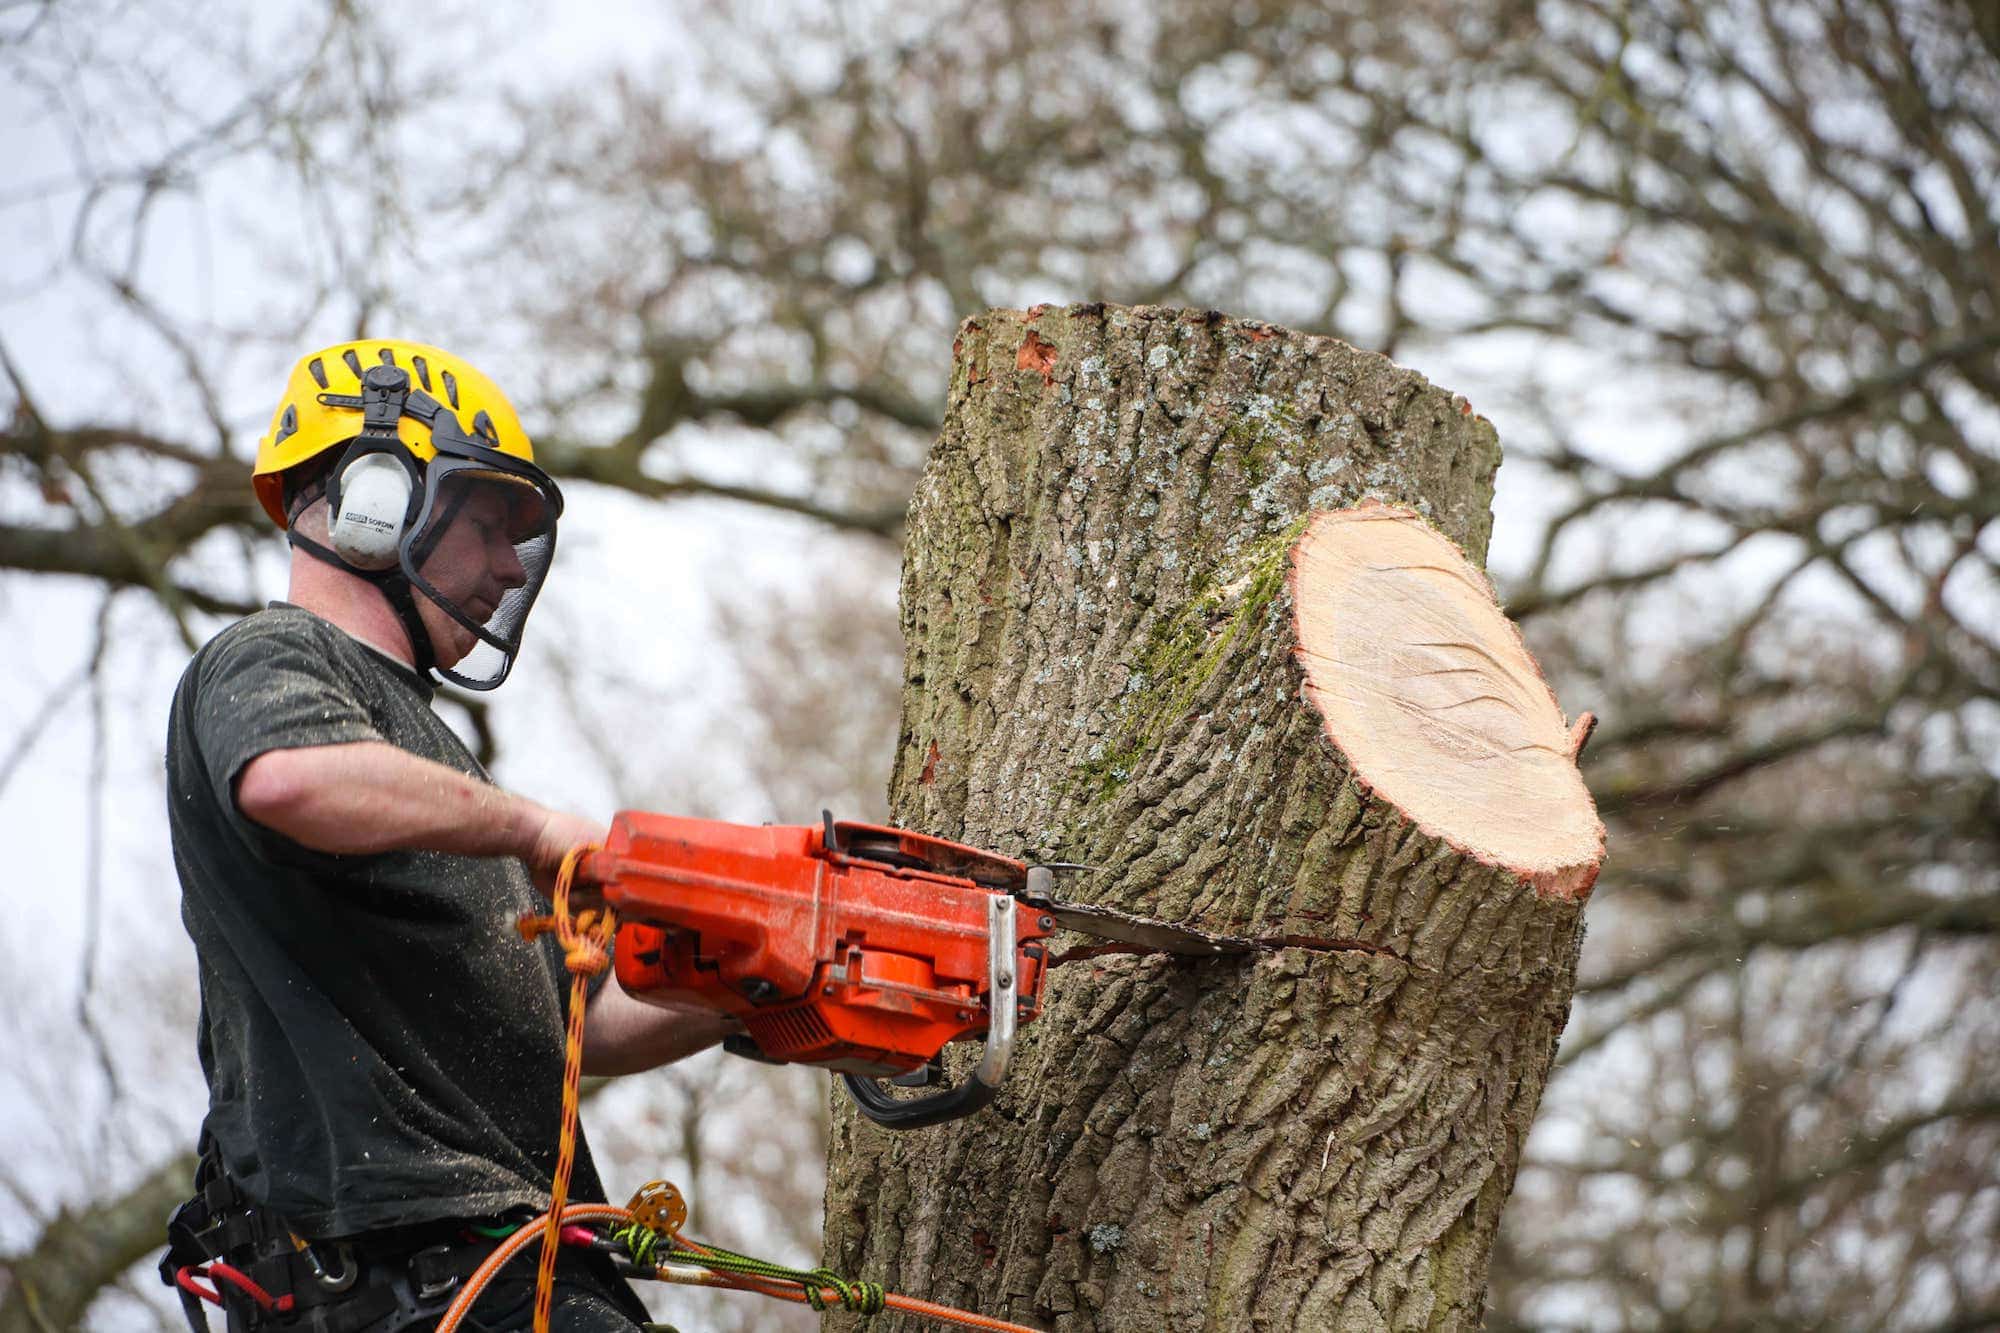 All arborists are fully trained and professional. 